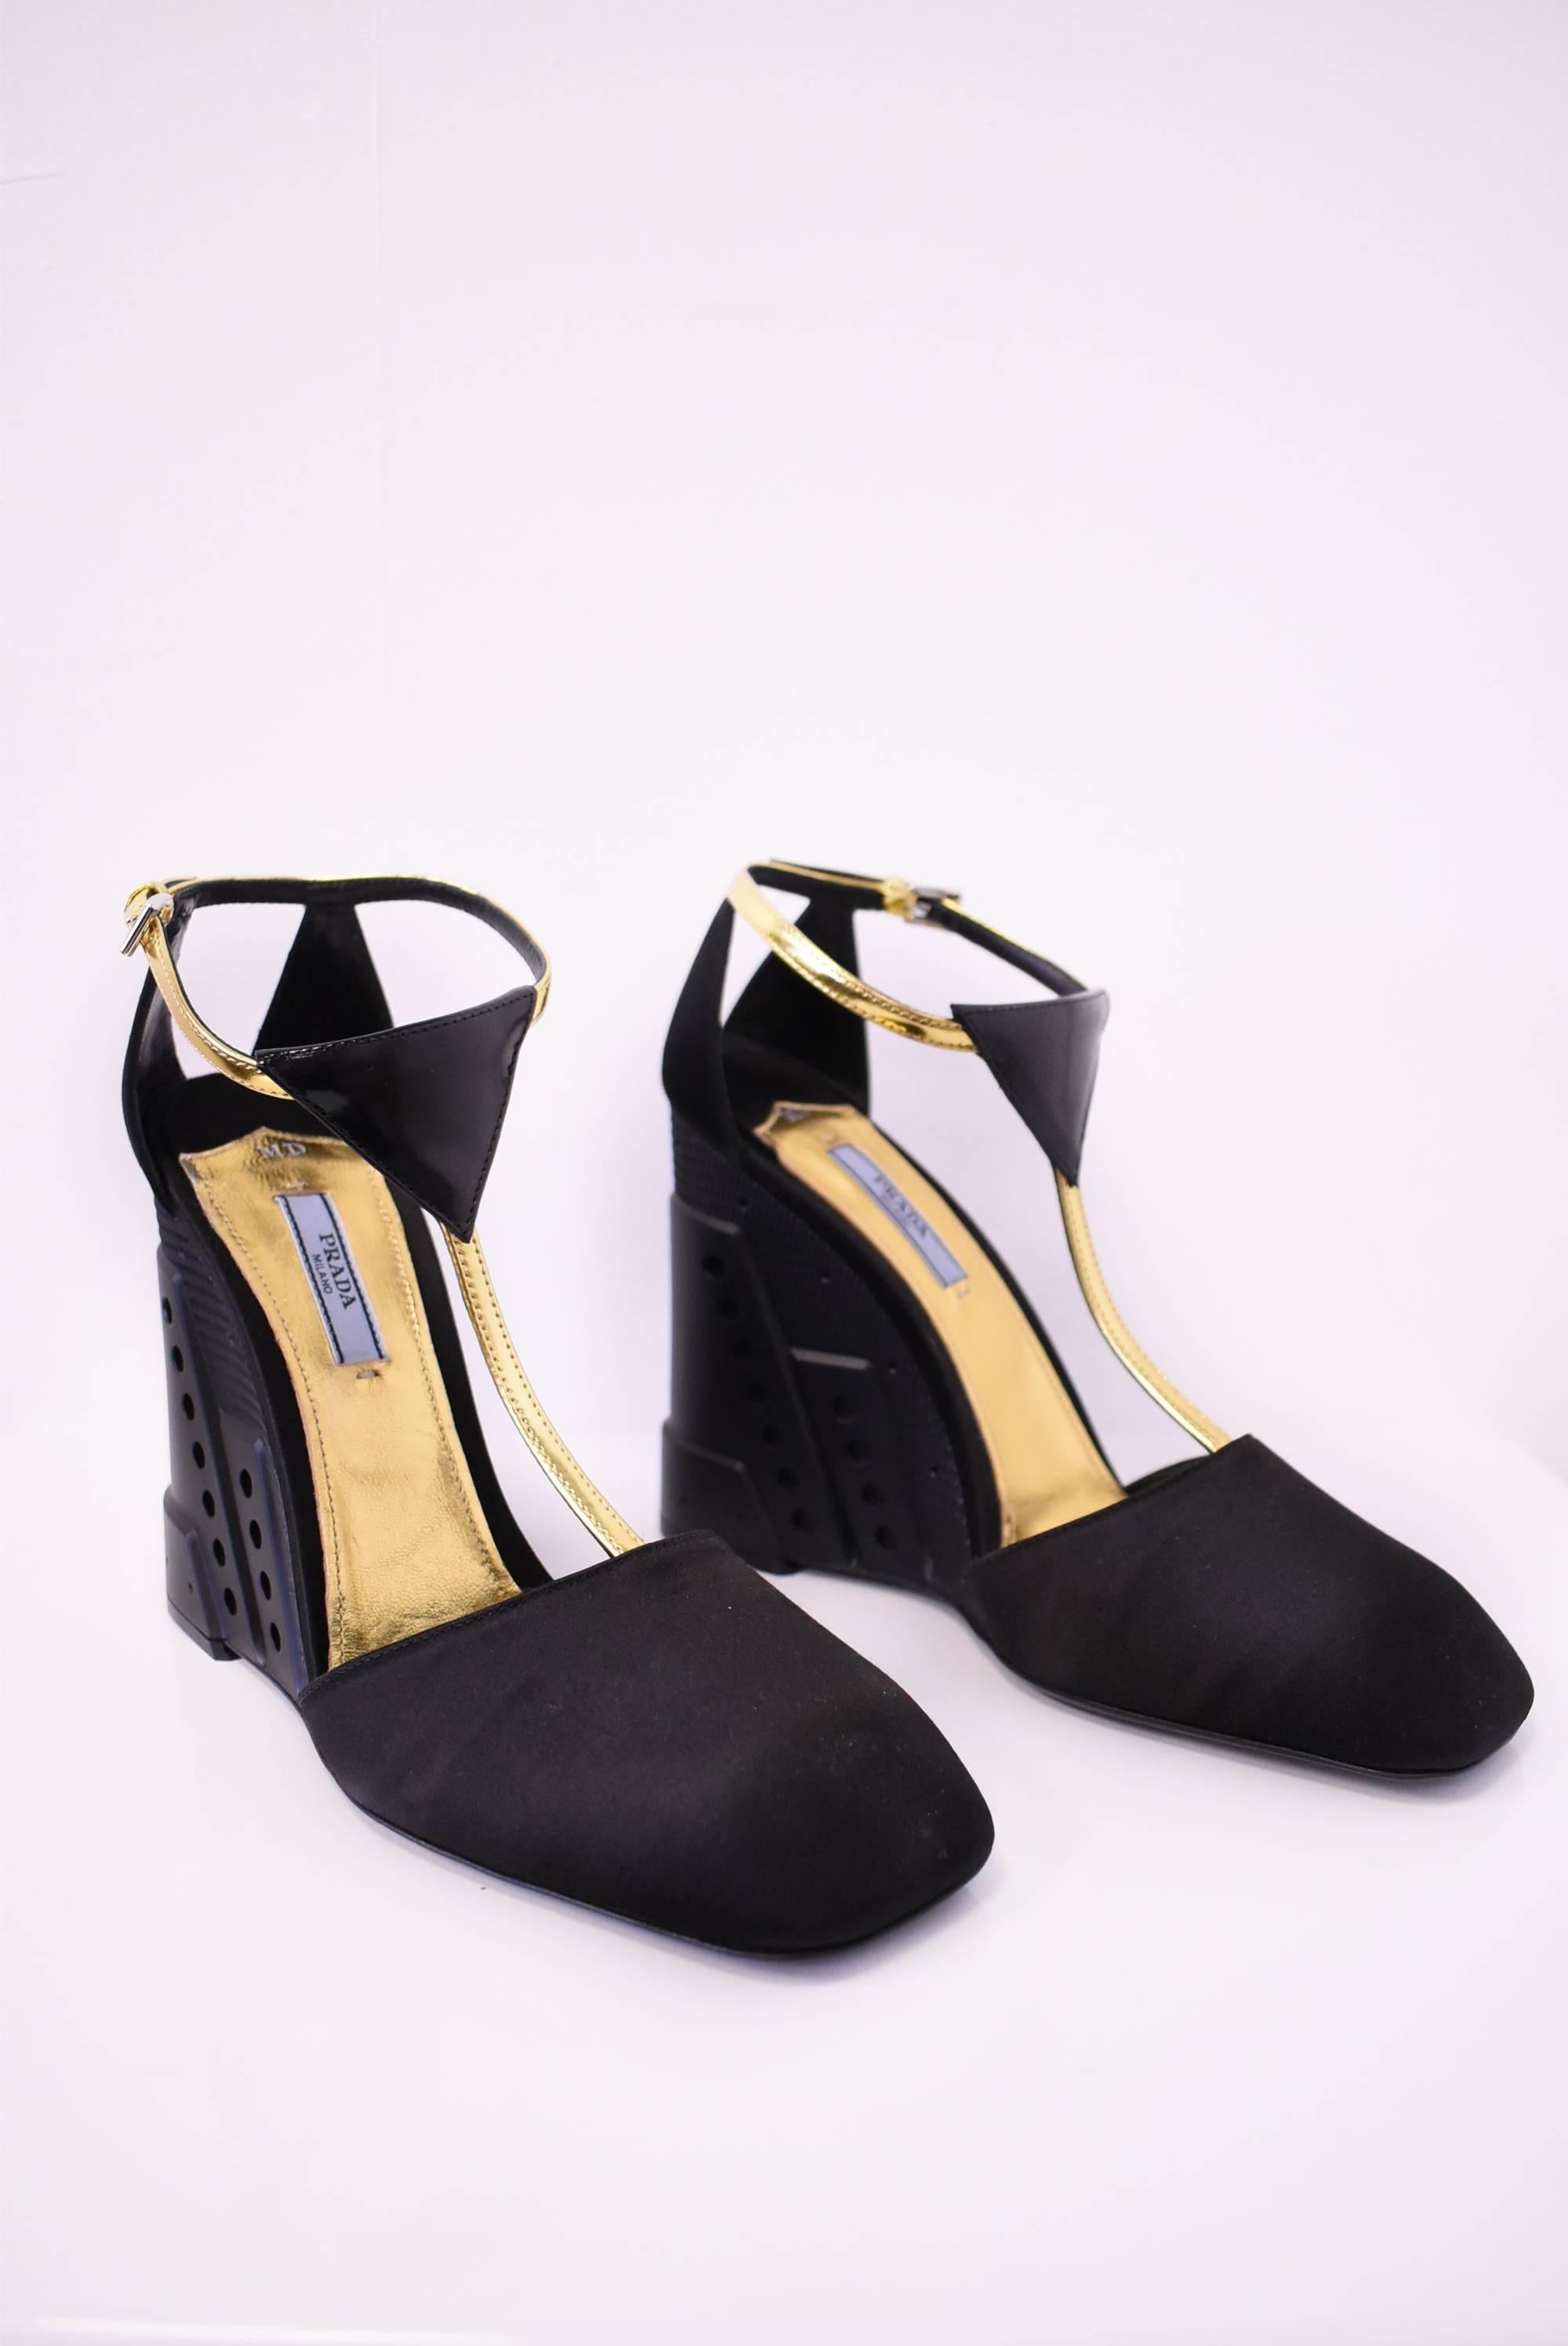 Prada Black Wedge Shoes with Gold Ankle Strap Unworn with Box and Dustbag A/W 14 In New Condition For Sale In London, GB